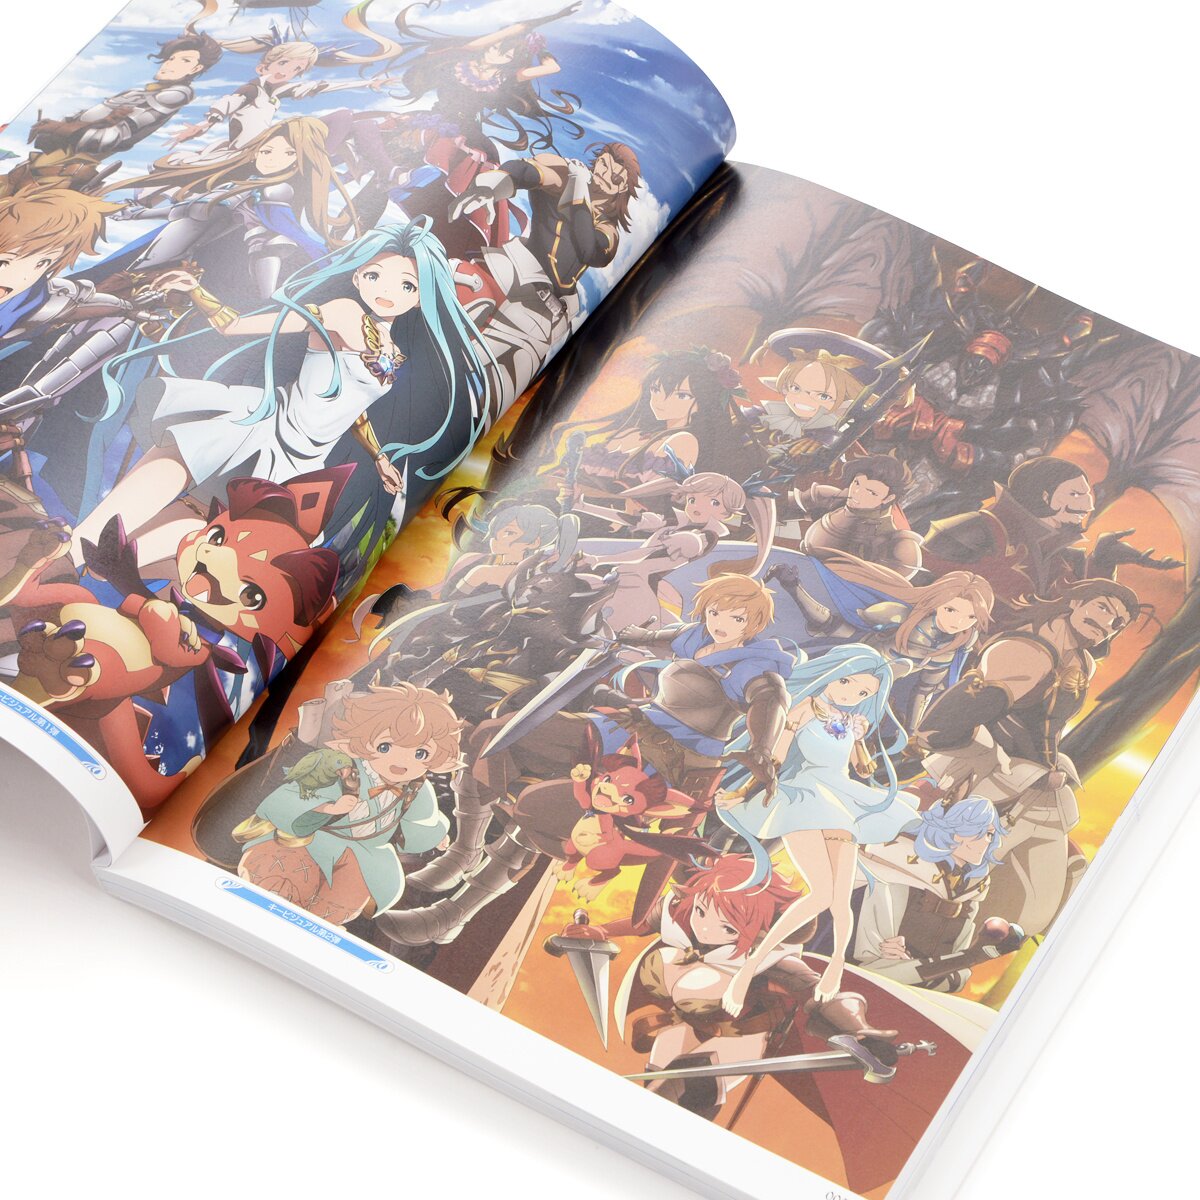 Granblue Fantasy - The Animation Blu-ray Cover Collection - Halcyon Realms  - Art Book Reviews - Anime, Manga, Film, Photography